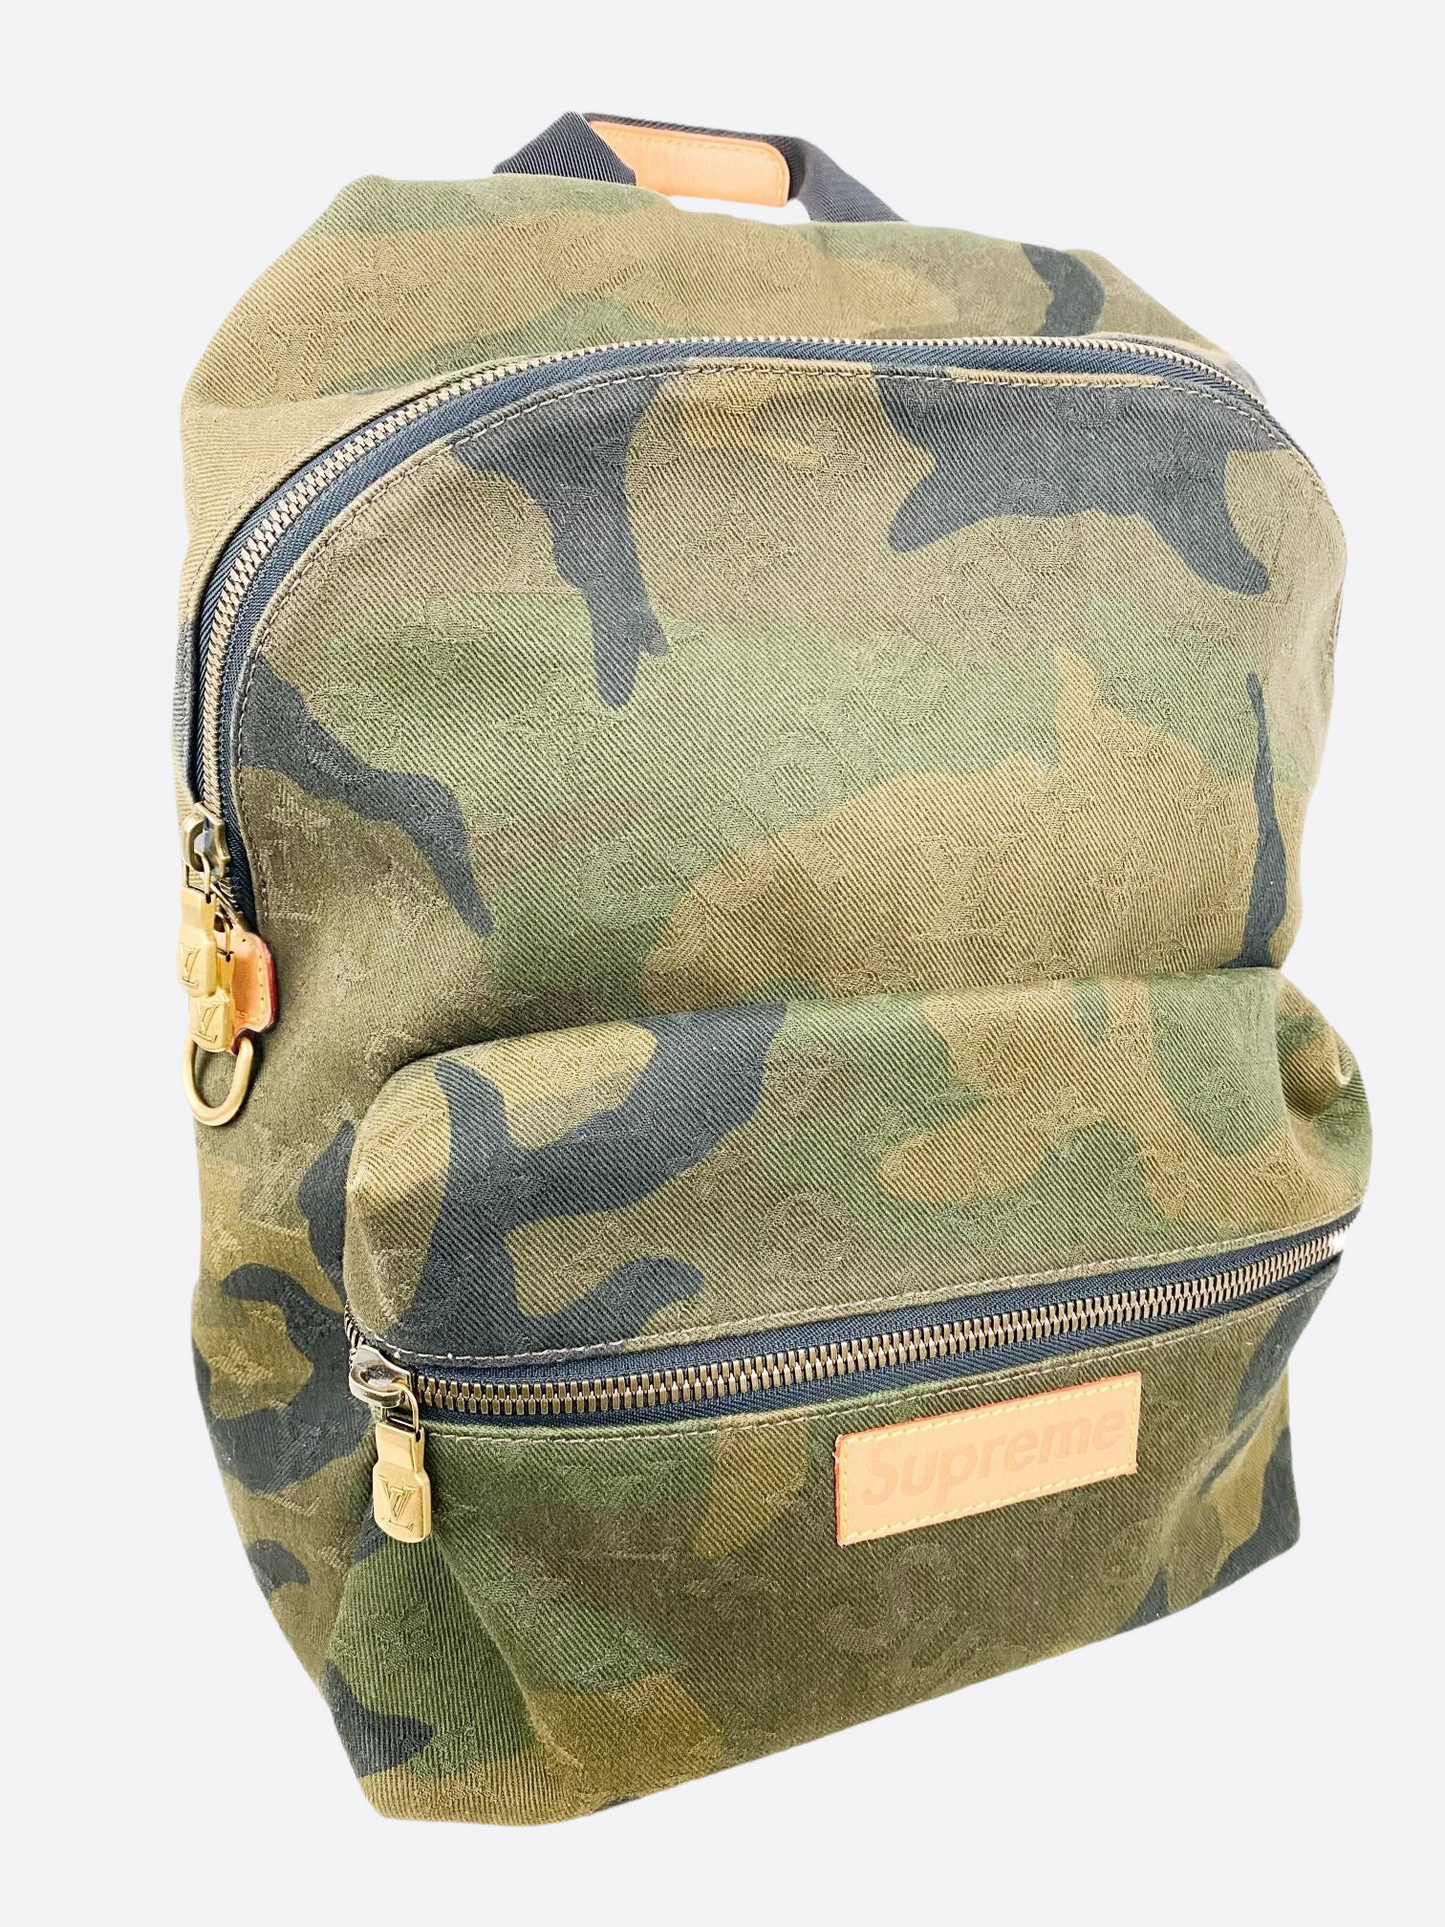 UNUSED LOUIS VUITTON x SUPREME 17AW Camouflage Apollo Backpack